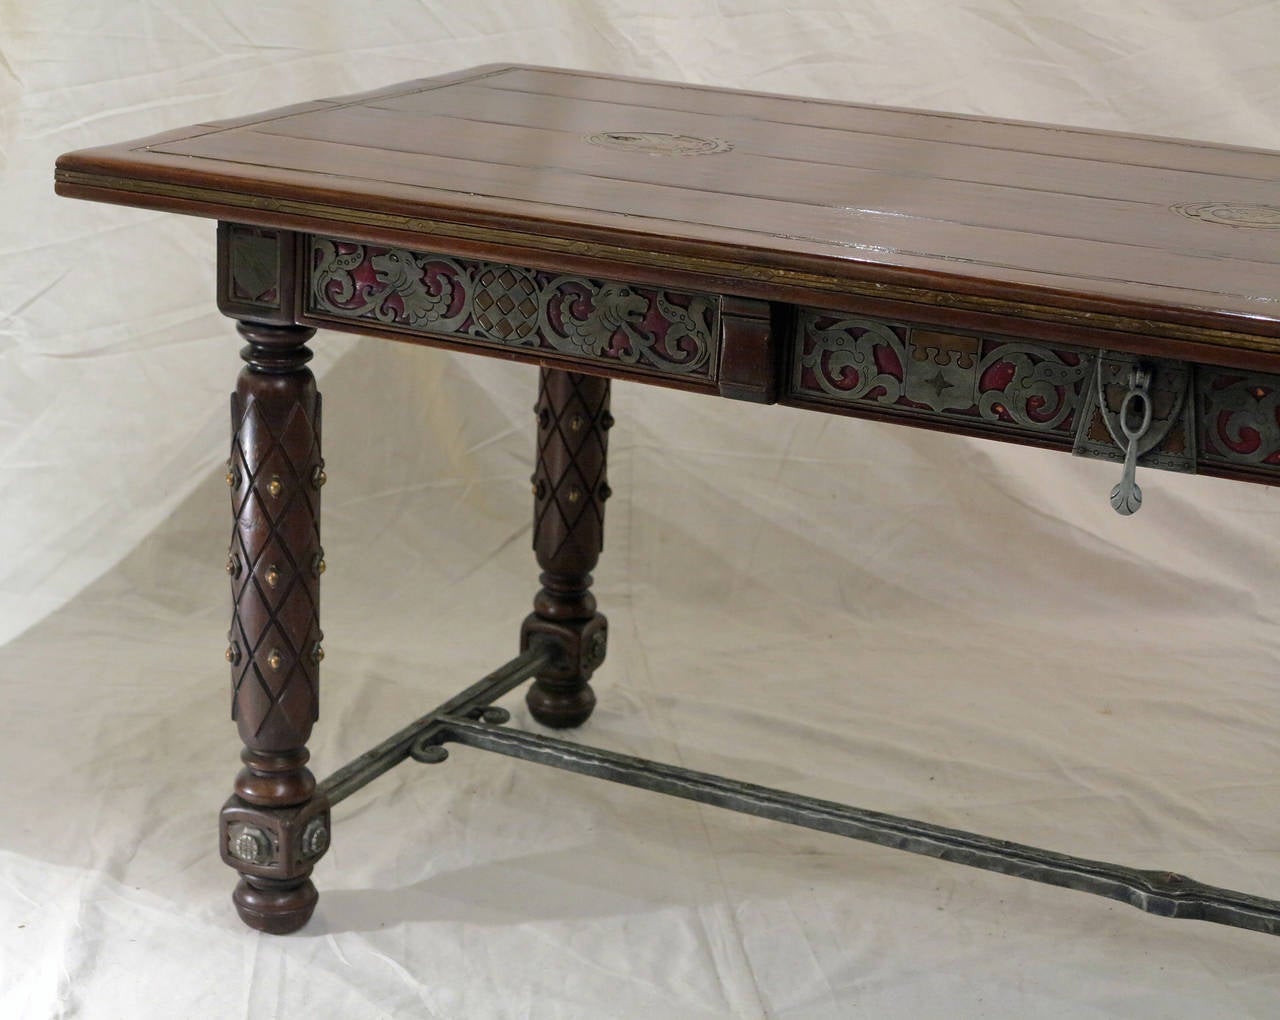 An Exceptional & Rare Medieval Style Center/Library Table
Late 19th Century

Inlaid throughout with different types of metals (pewter, copper, bronze, iron)
featuring three highly decorated drawers, seating on 4 bronze decorated legs ending on